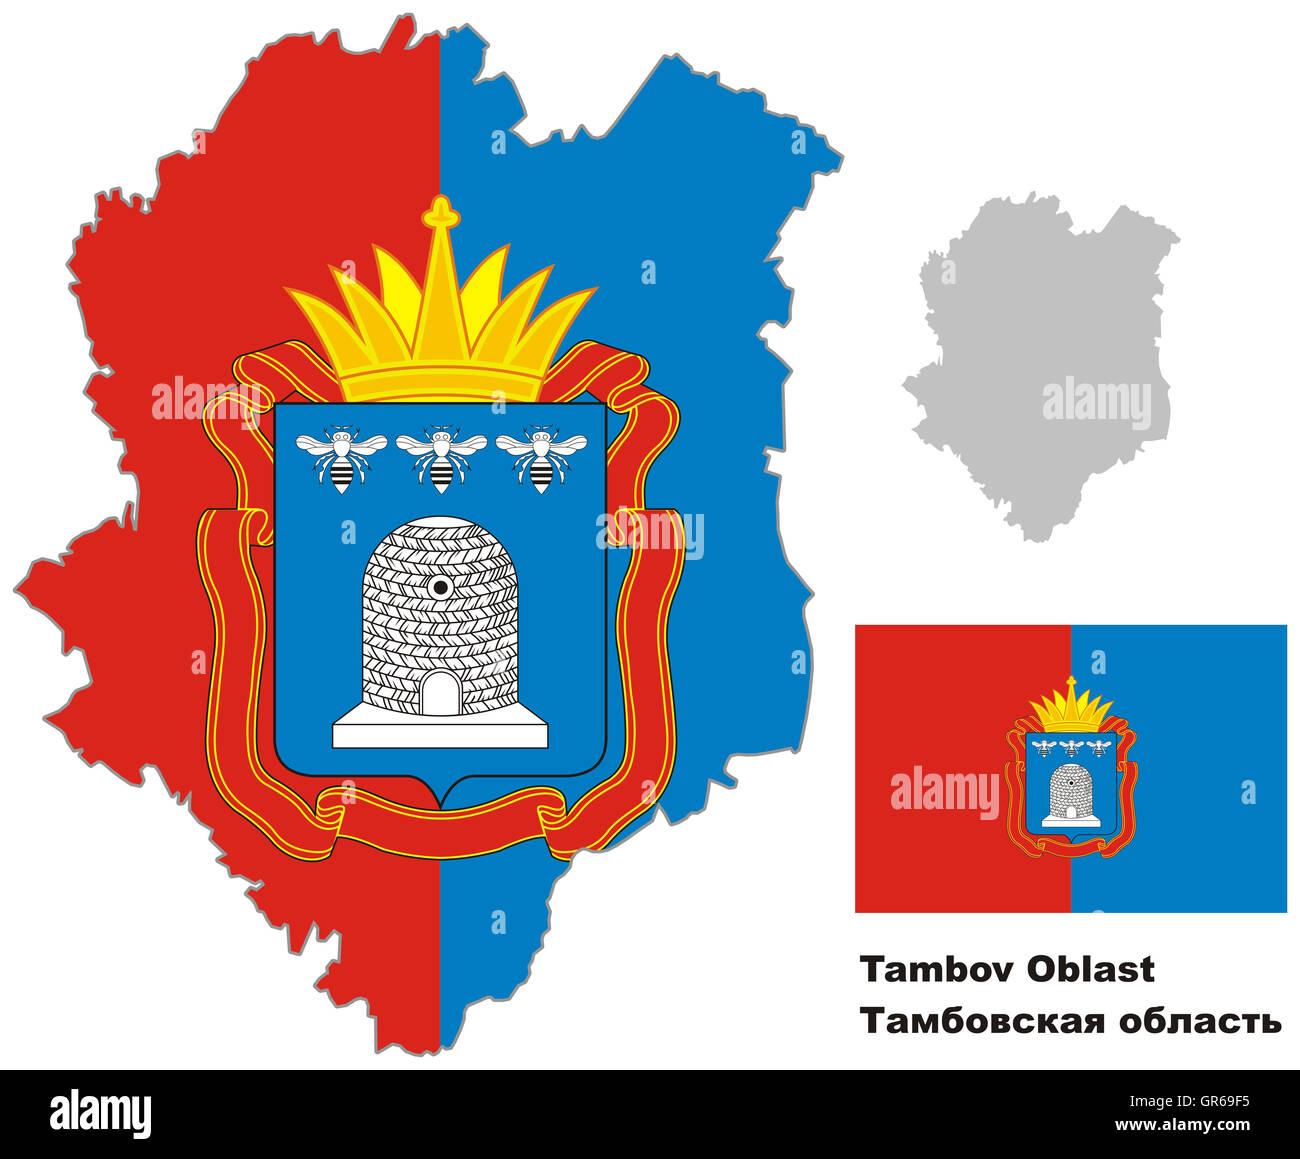 Outline map of Tambov Oblast with flag. Regions of Russia. Vector illustration. Stock Photo